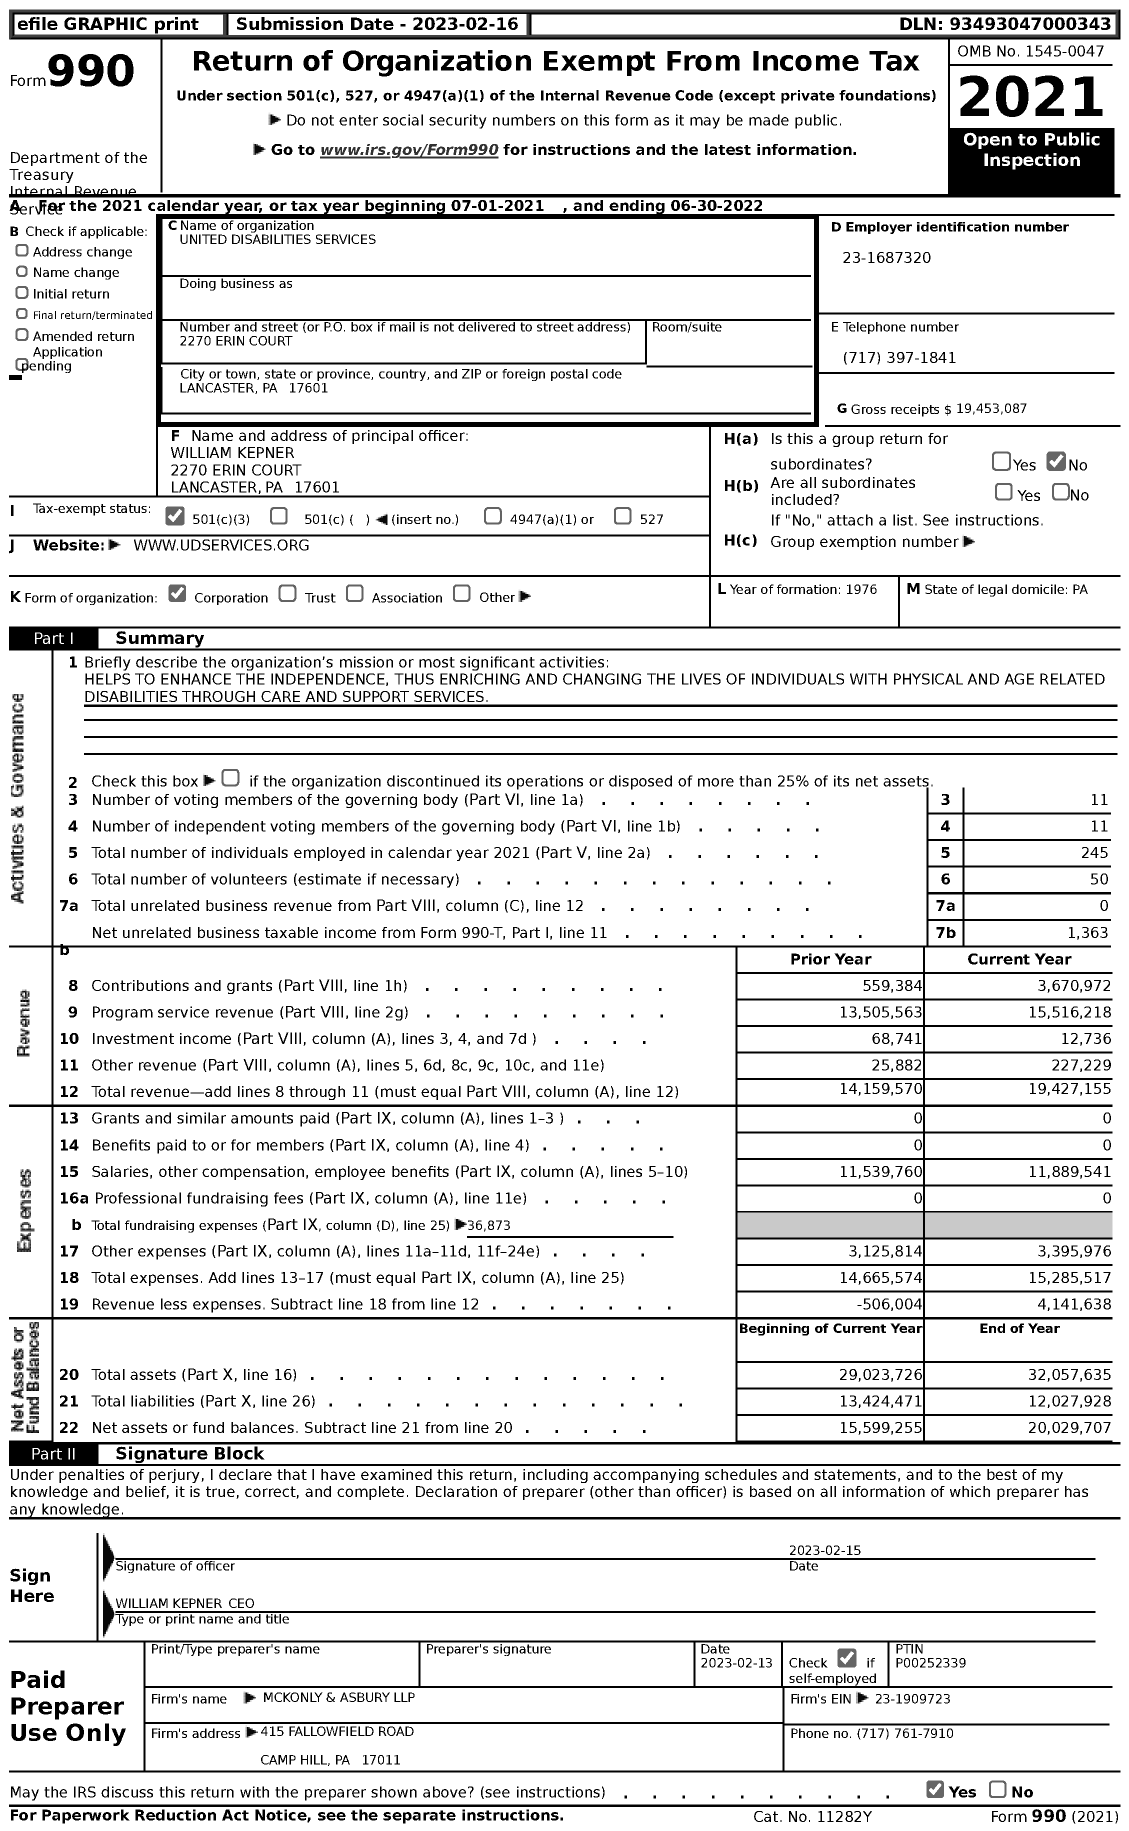 Image of first page of 2021 Form 990 for United Disabilities Services (UDS)